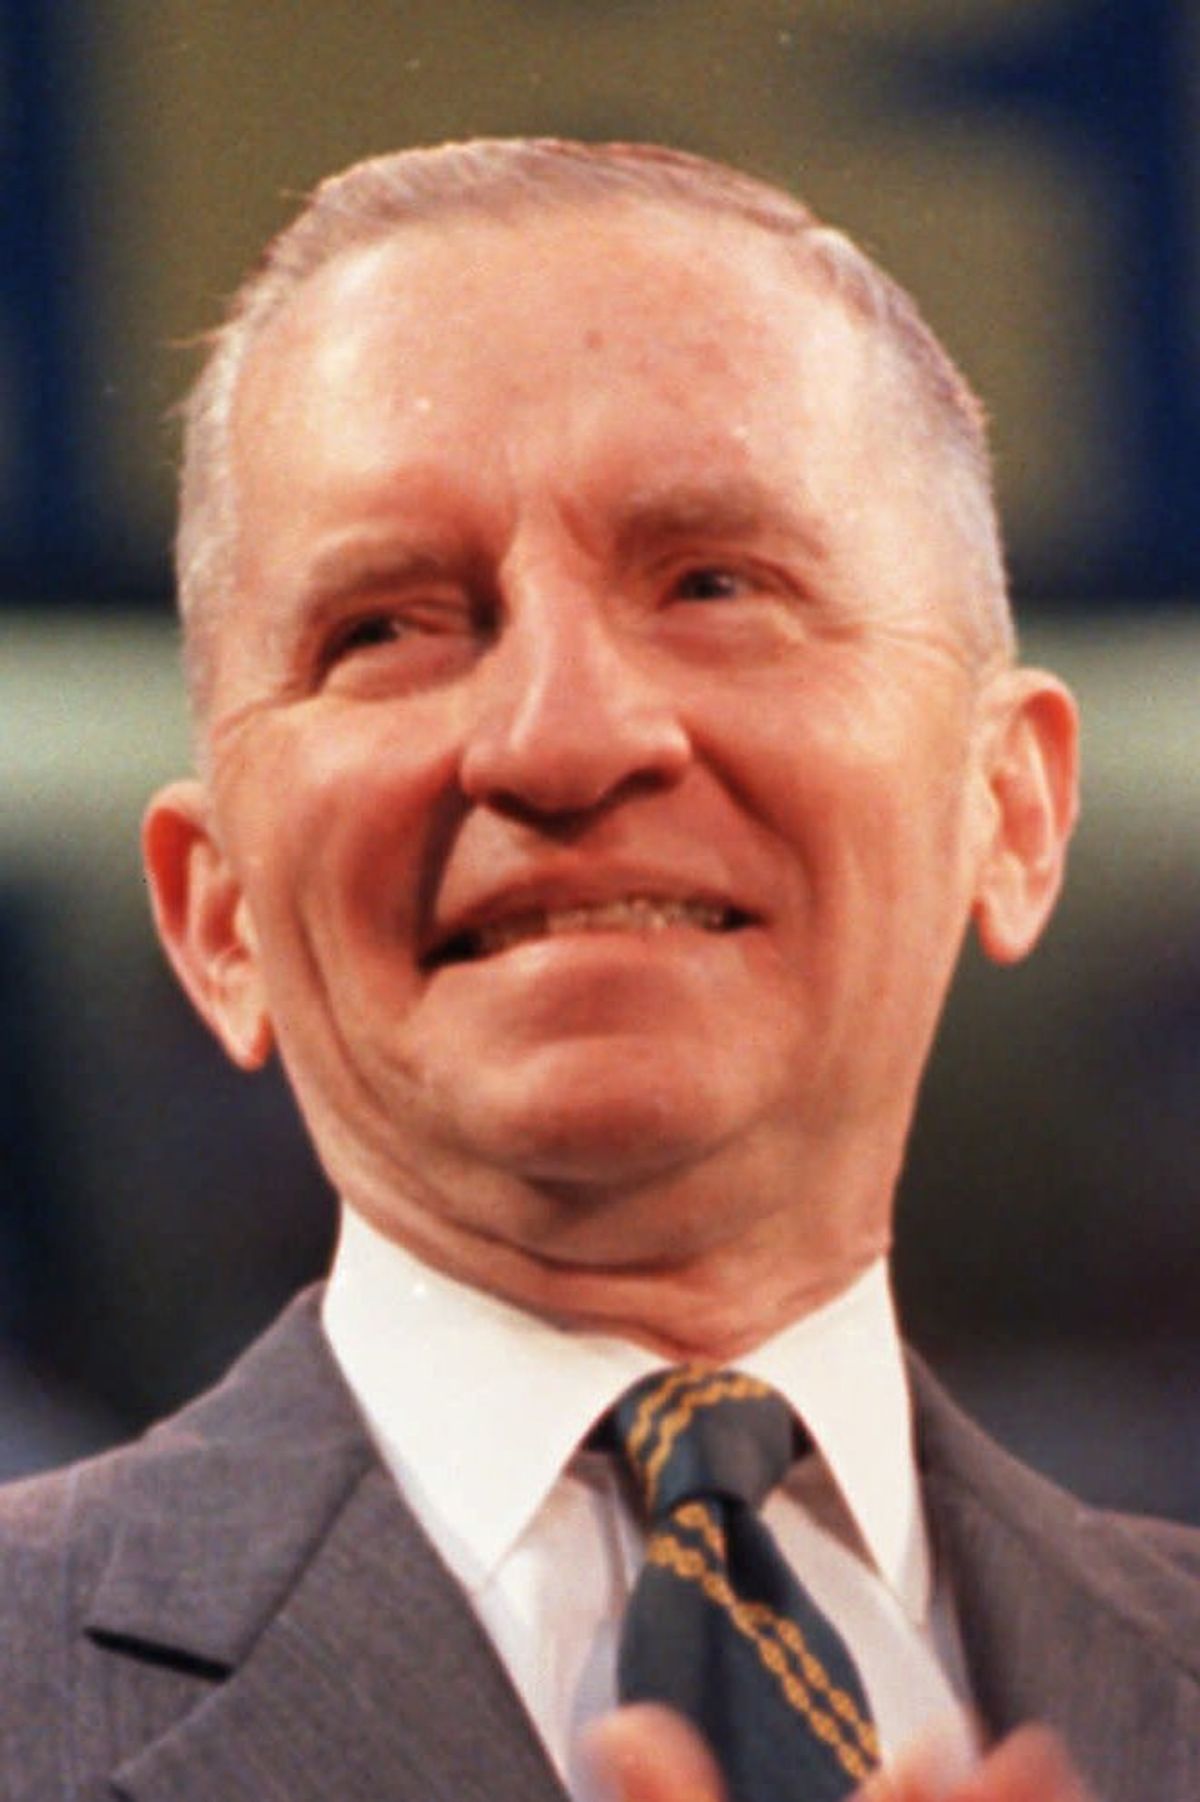 Ross Perot shown in this Nov. 2, 1992  photo captured 19 percent of the vote in 1992, perhaps giving Clinton the edge he needed to beat George Bush. More recently he has tantalized current supporters with suggestions he might run again, but continues to say that it is up to his new Reform Party, and not him, to decide. (AP Photo/ Ron Heflin, FILE) (Associated Press)